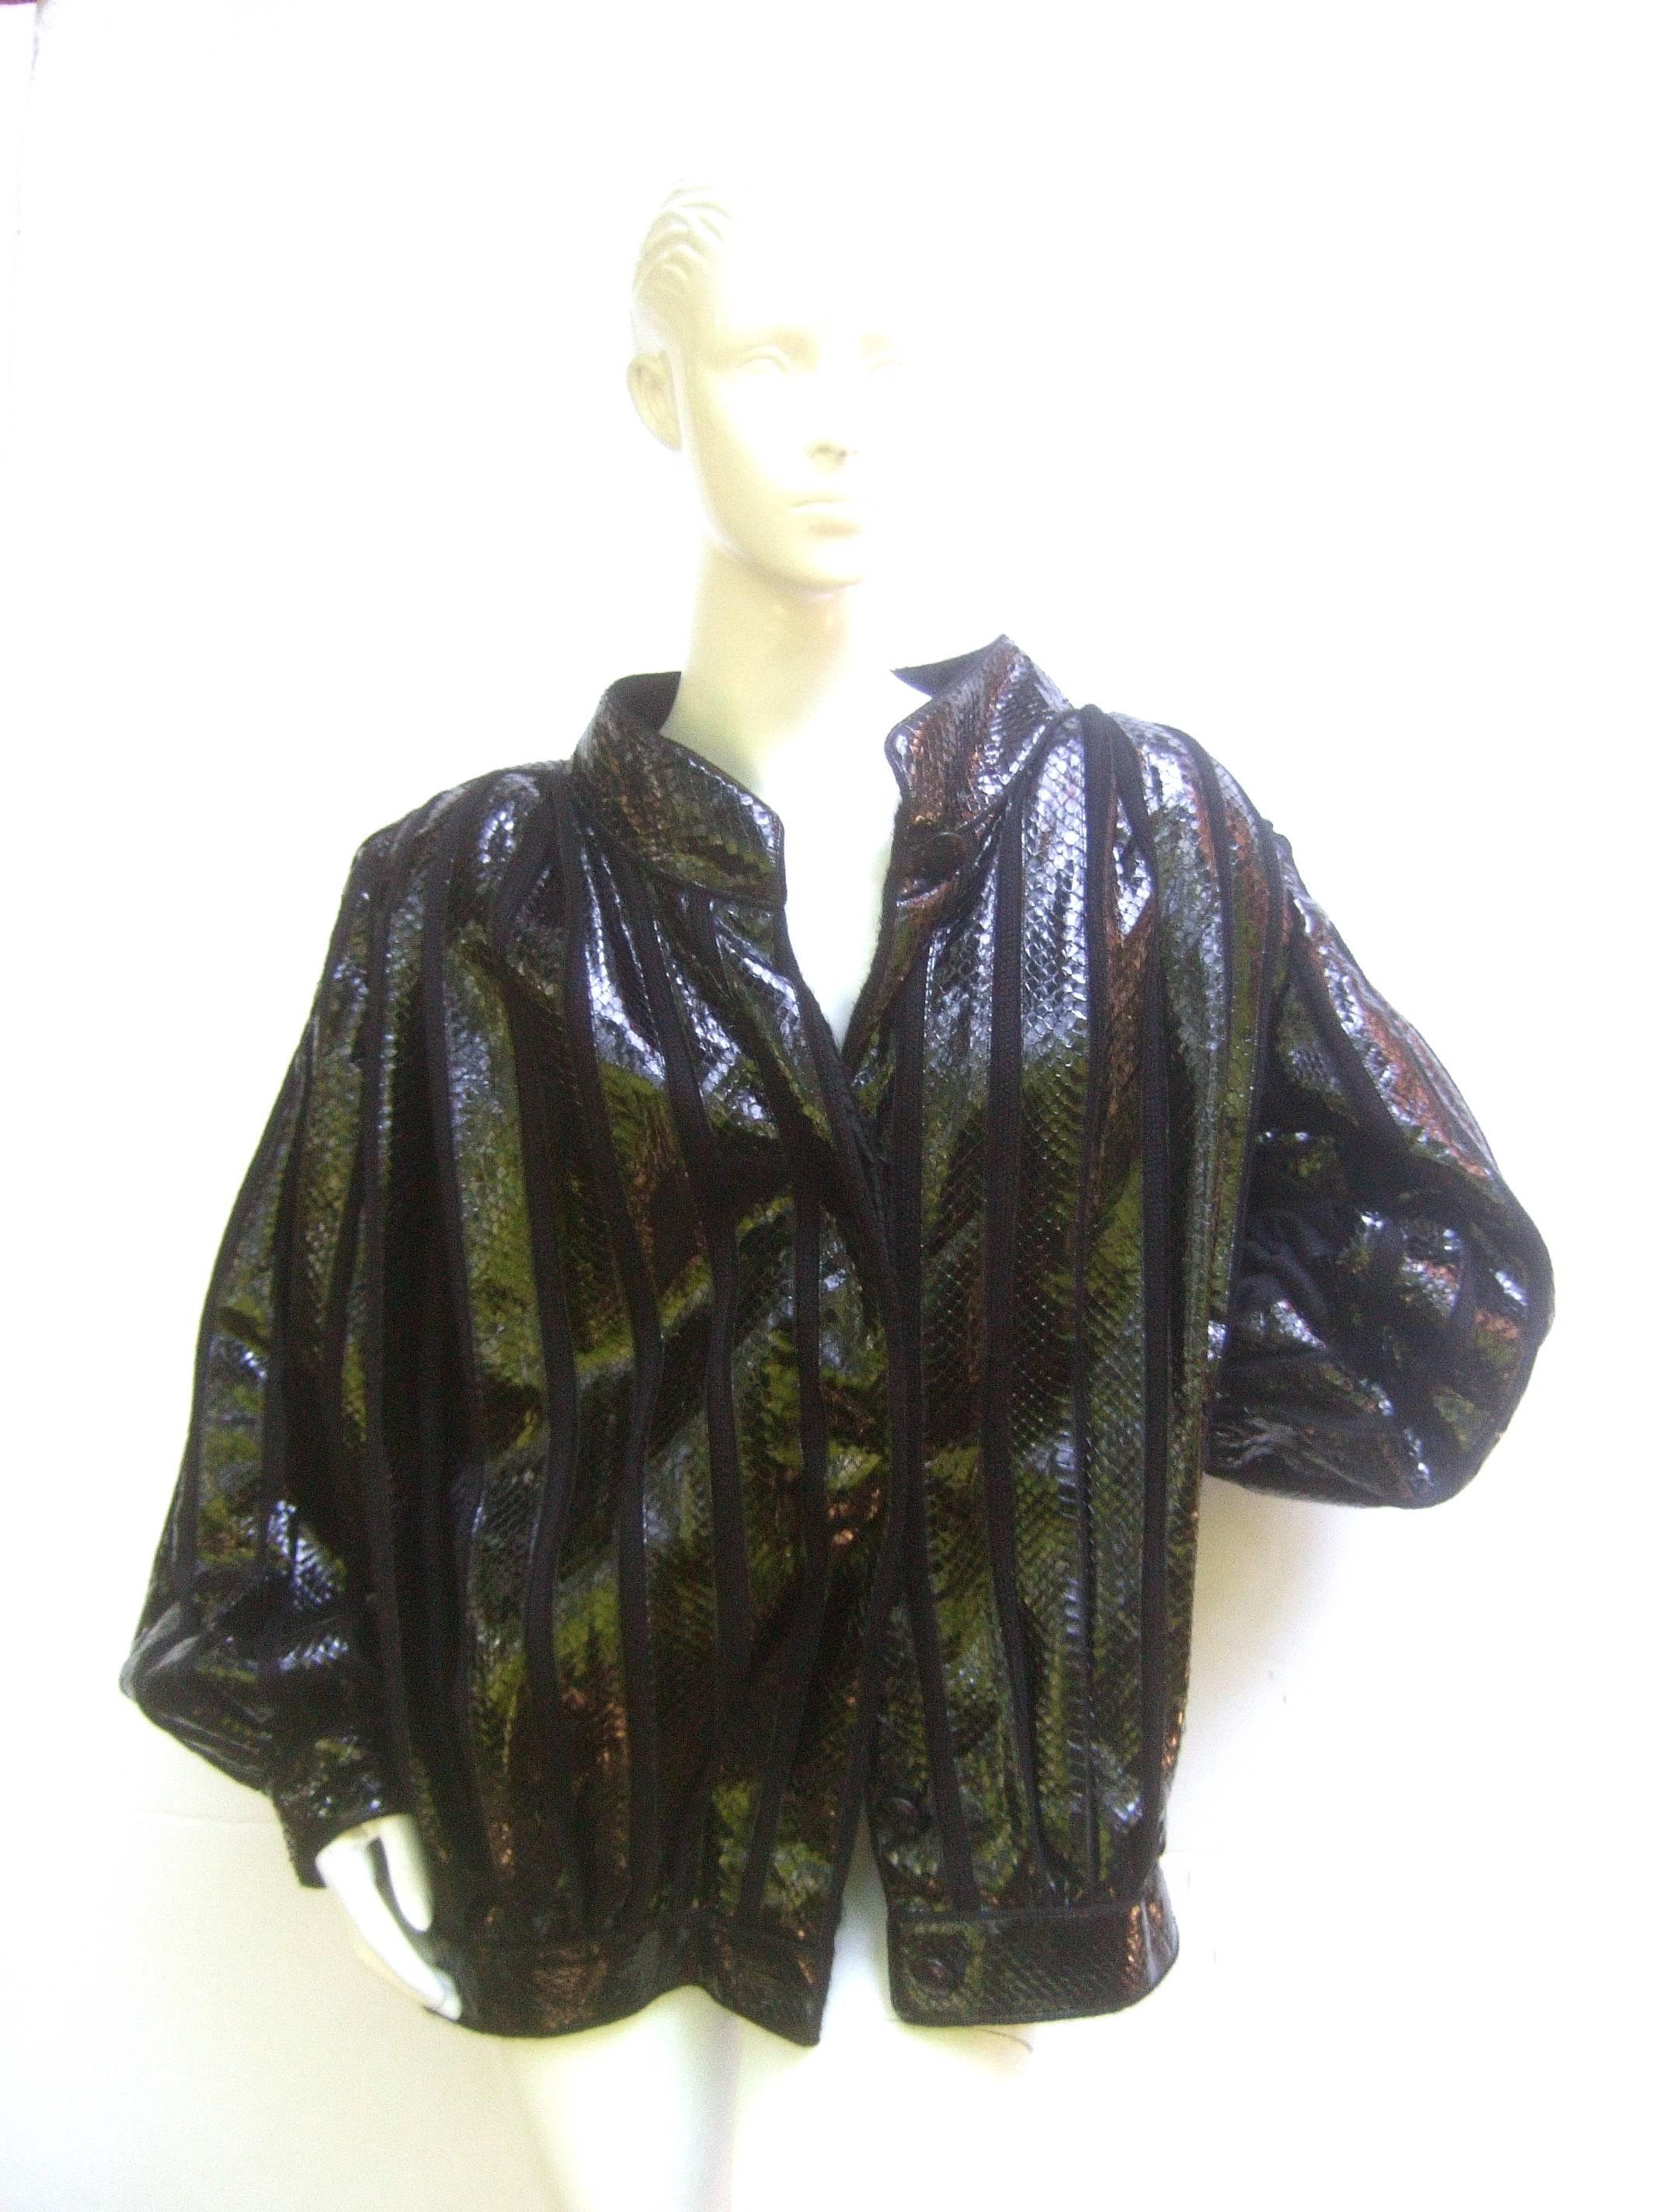 Avant garde Italian snakeskin jacket from Neiman Marcus Size 44
The exotic 1980s Italian voluminous boxy jacket is designed with 
vertical bands of shiny black snakeskin. Underneath the snakeskin 
bands is a black mohair shell that is partially